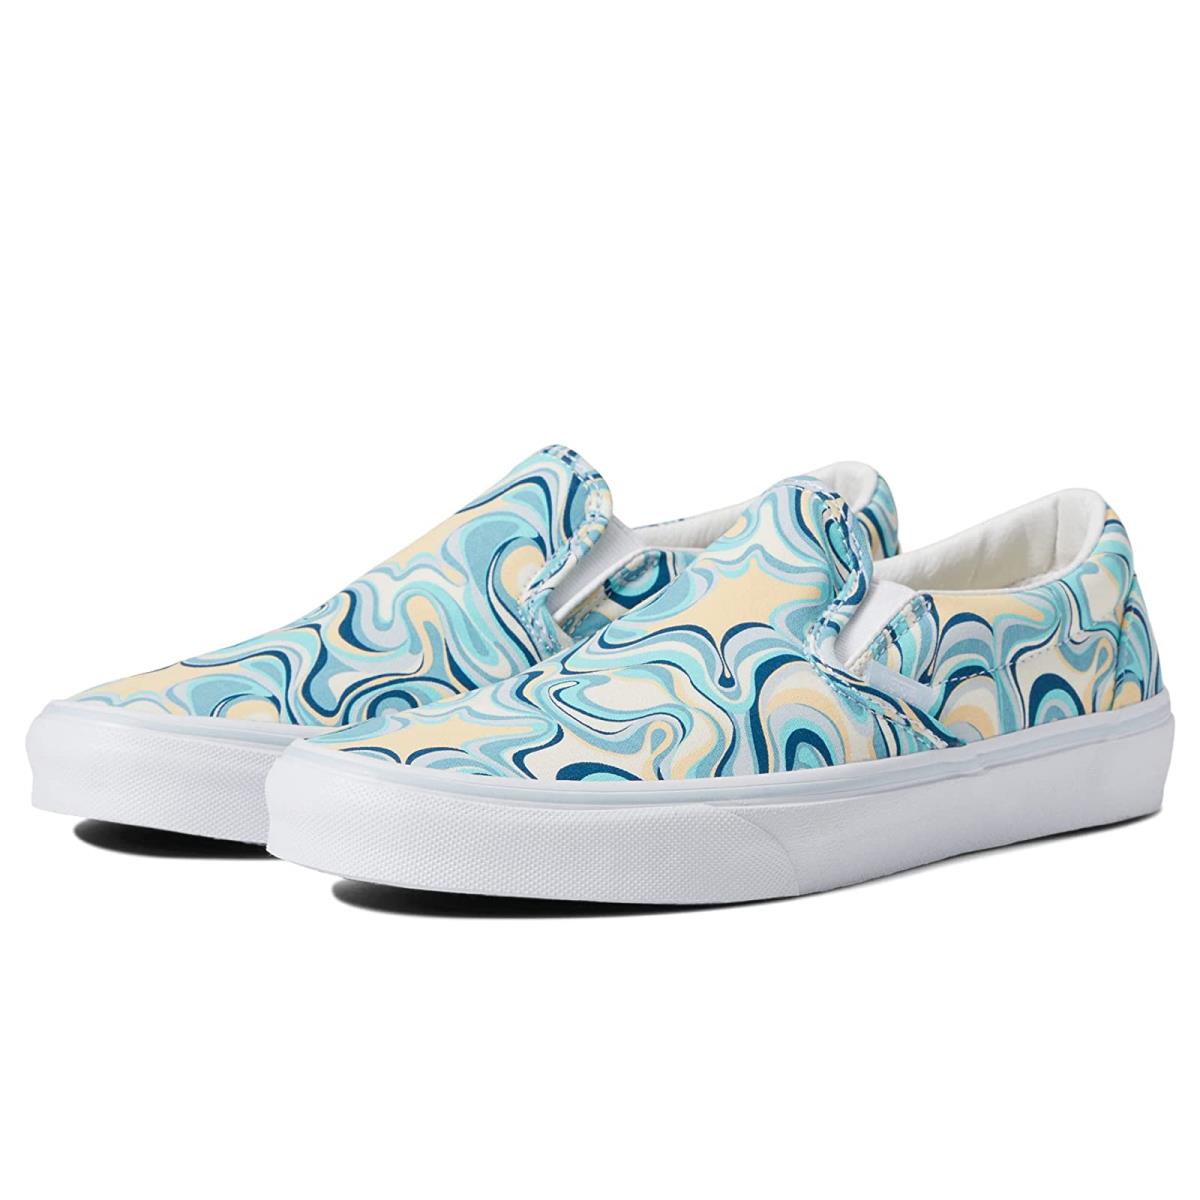 Unisex Sneakers Athletic Shoes Vans Classic Slip-on Swirl Turquoise